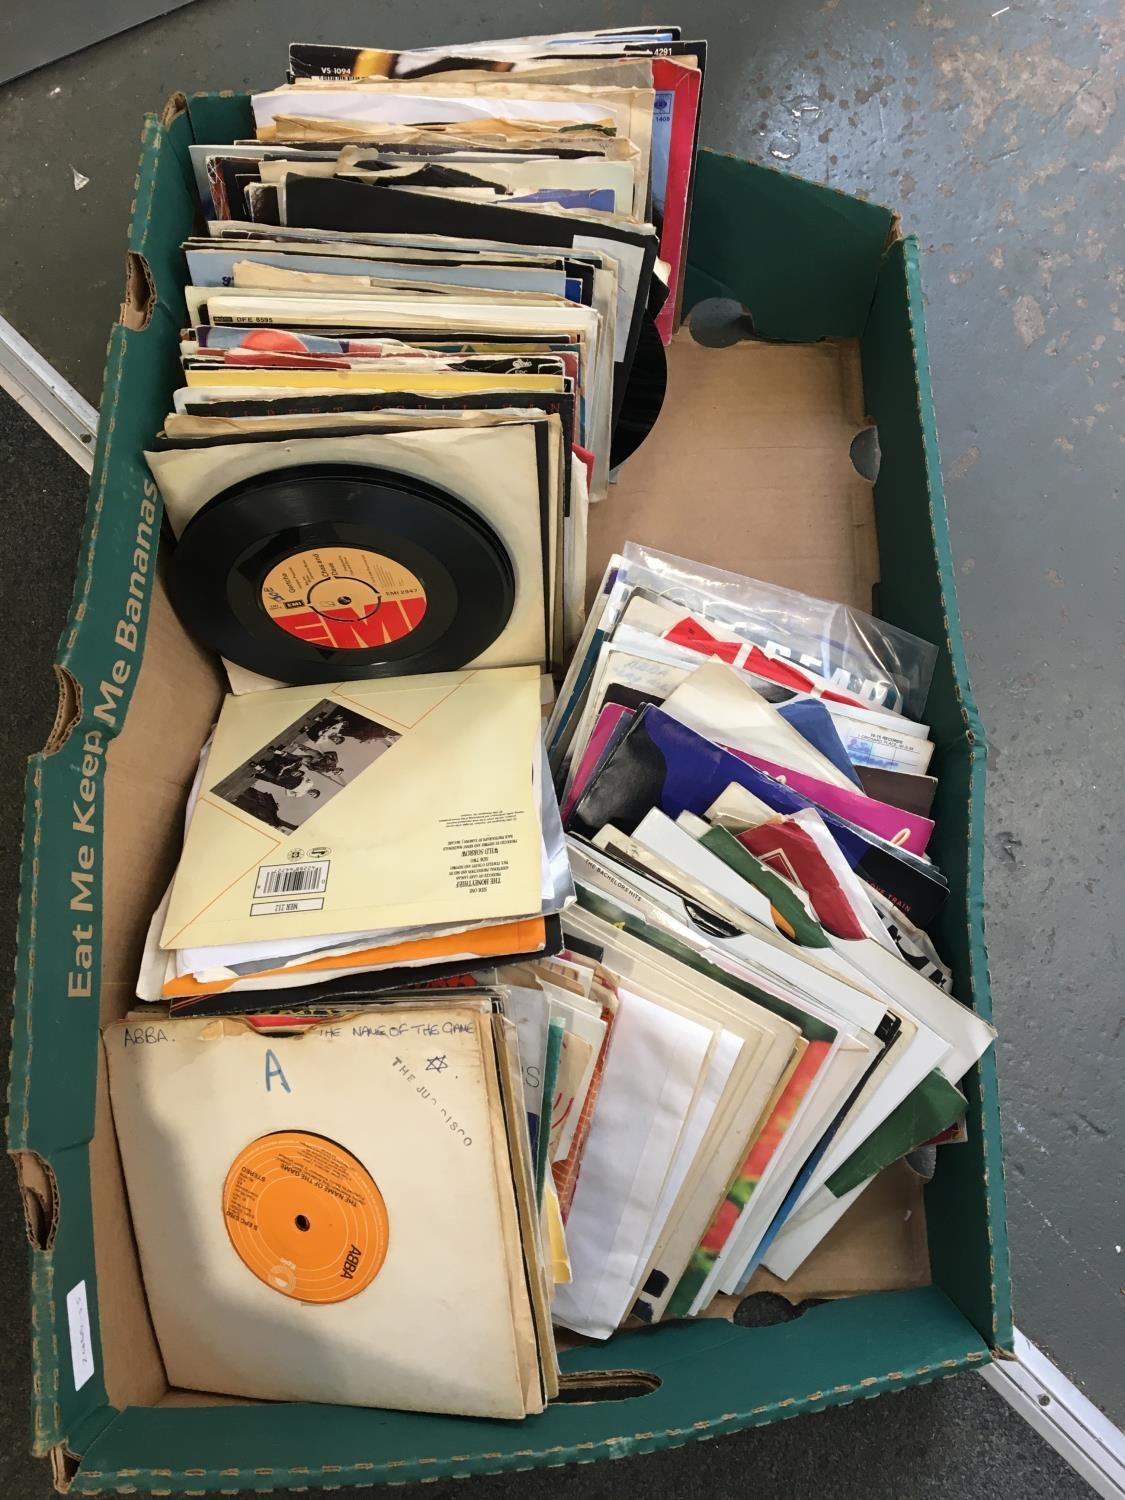 A mixed box of 7" singles, mainly '70s and '80s, pop, disco, and rock [banana box]